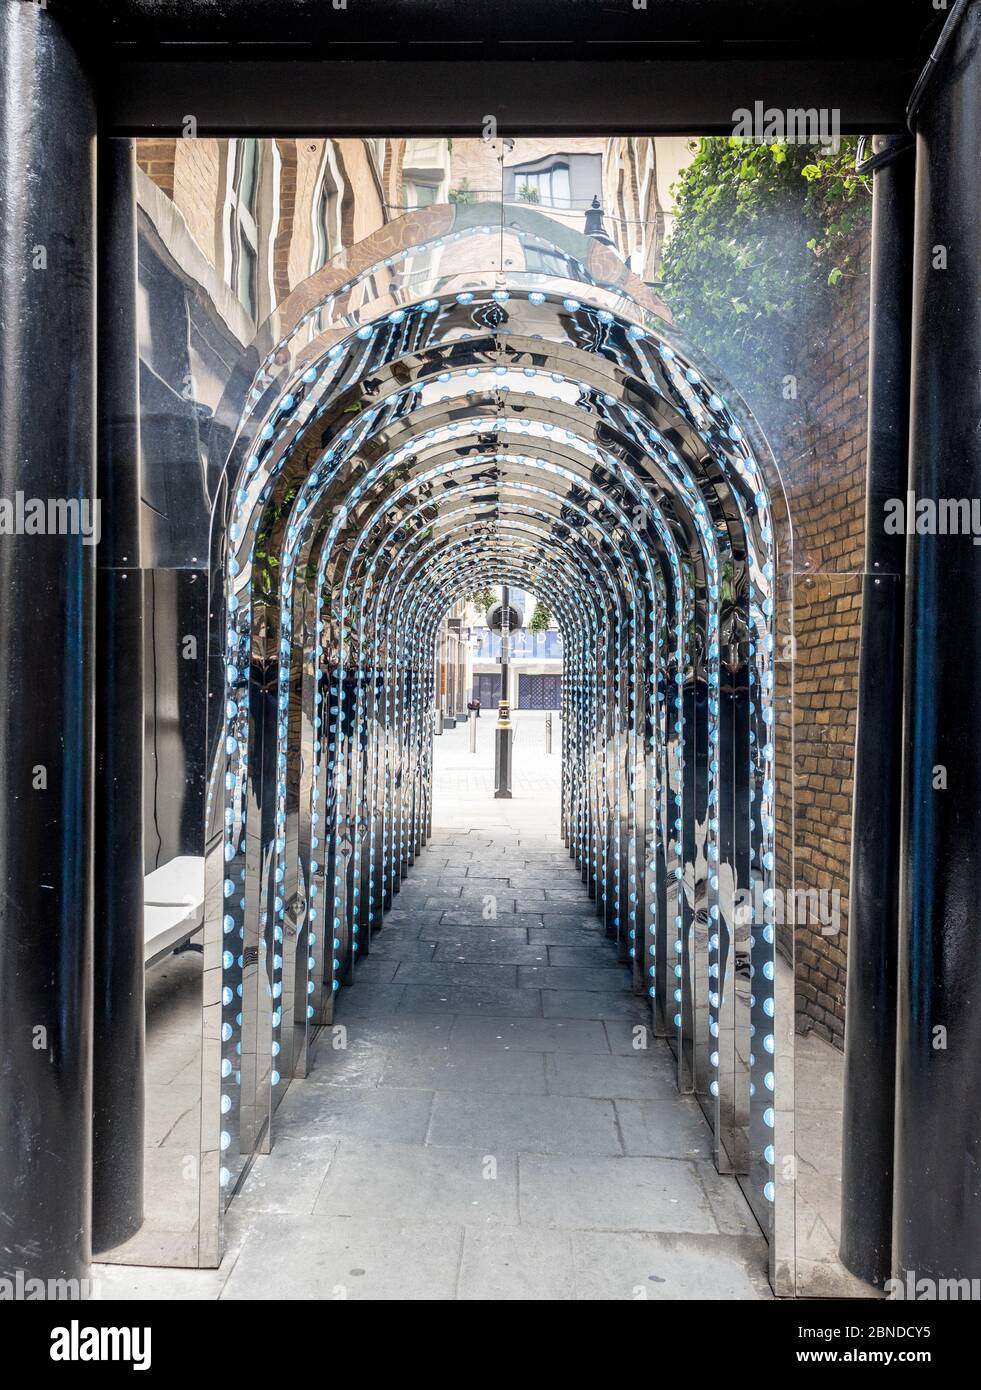 Lit archway in Covent Garden London UK Stock Photo